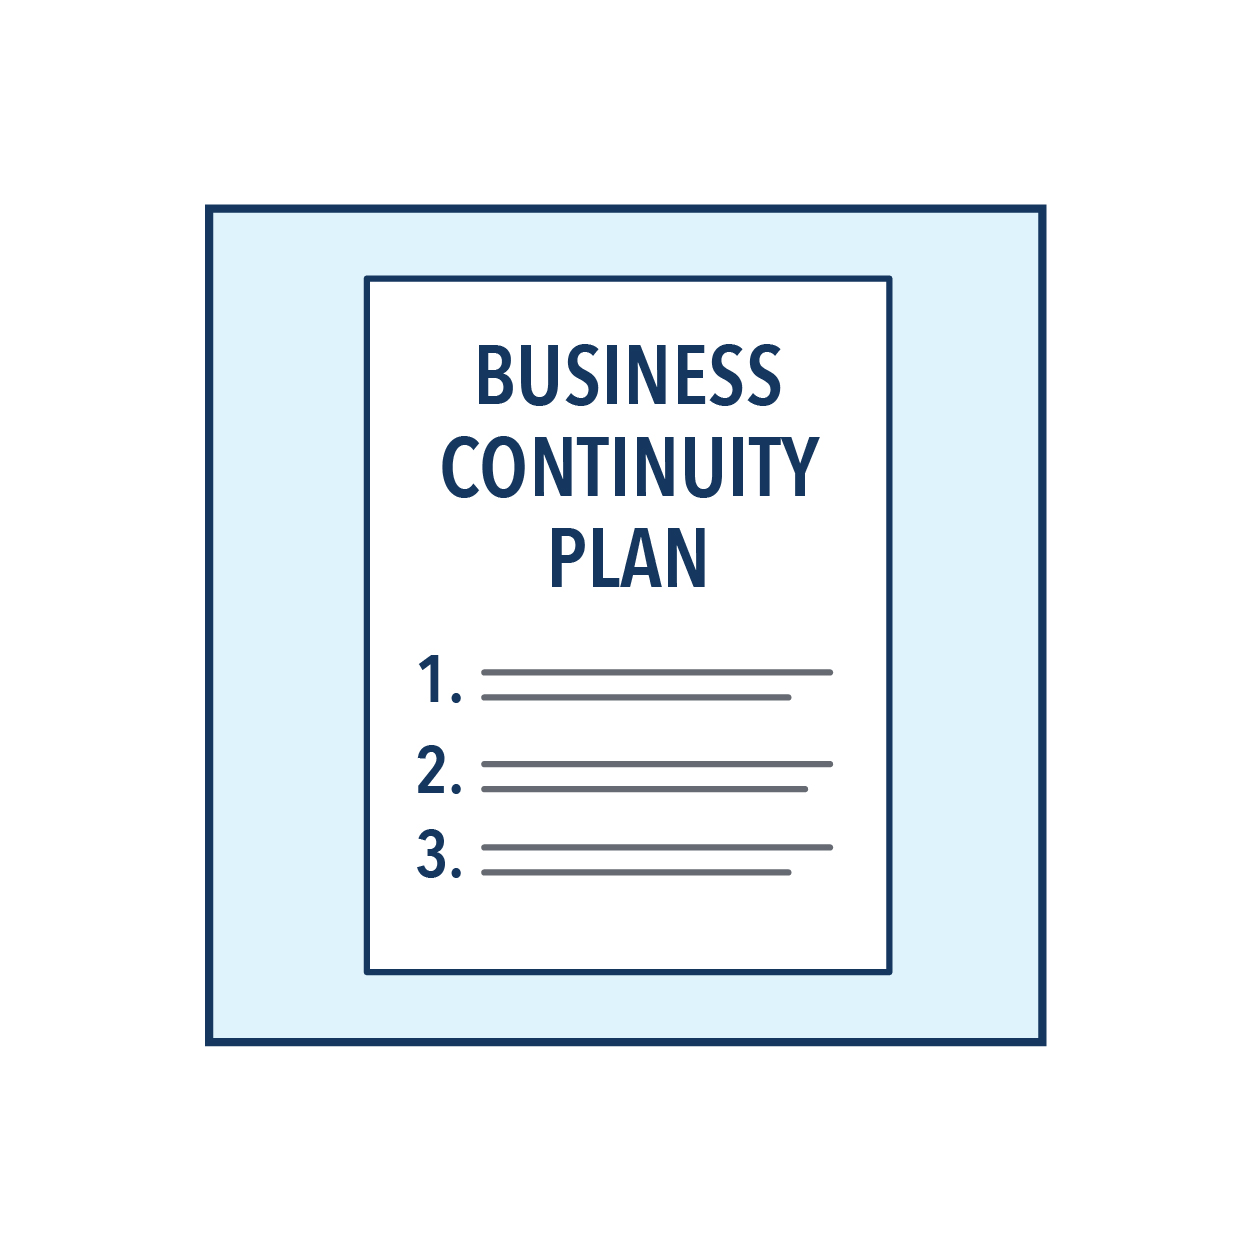 A piece of paper with Business Continuity Plan written along the top 